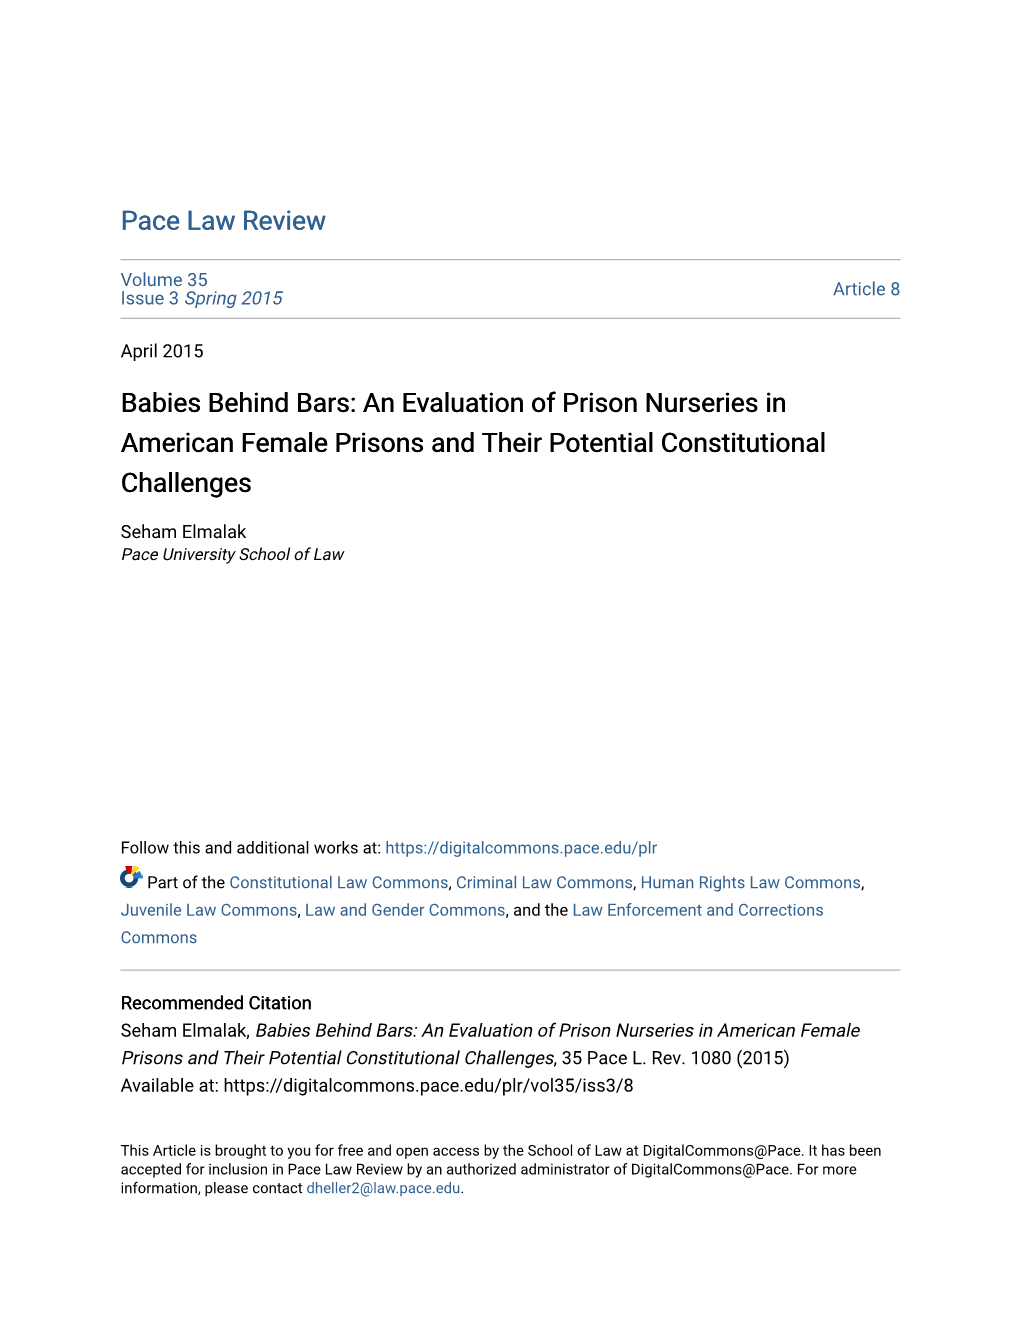 Babies Behind Bars: an Evaluation of Prison Nurseries in American Female Prisons and Their Potential Constitutional Challenges